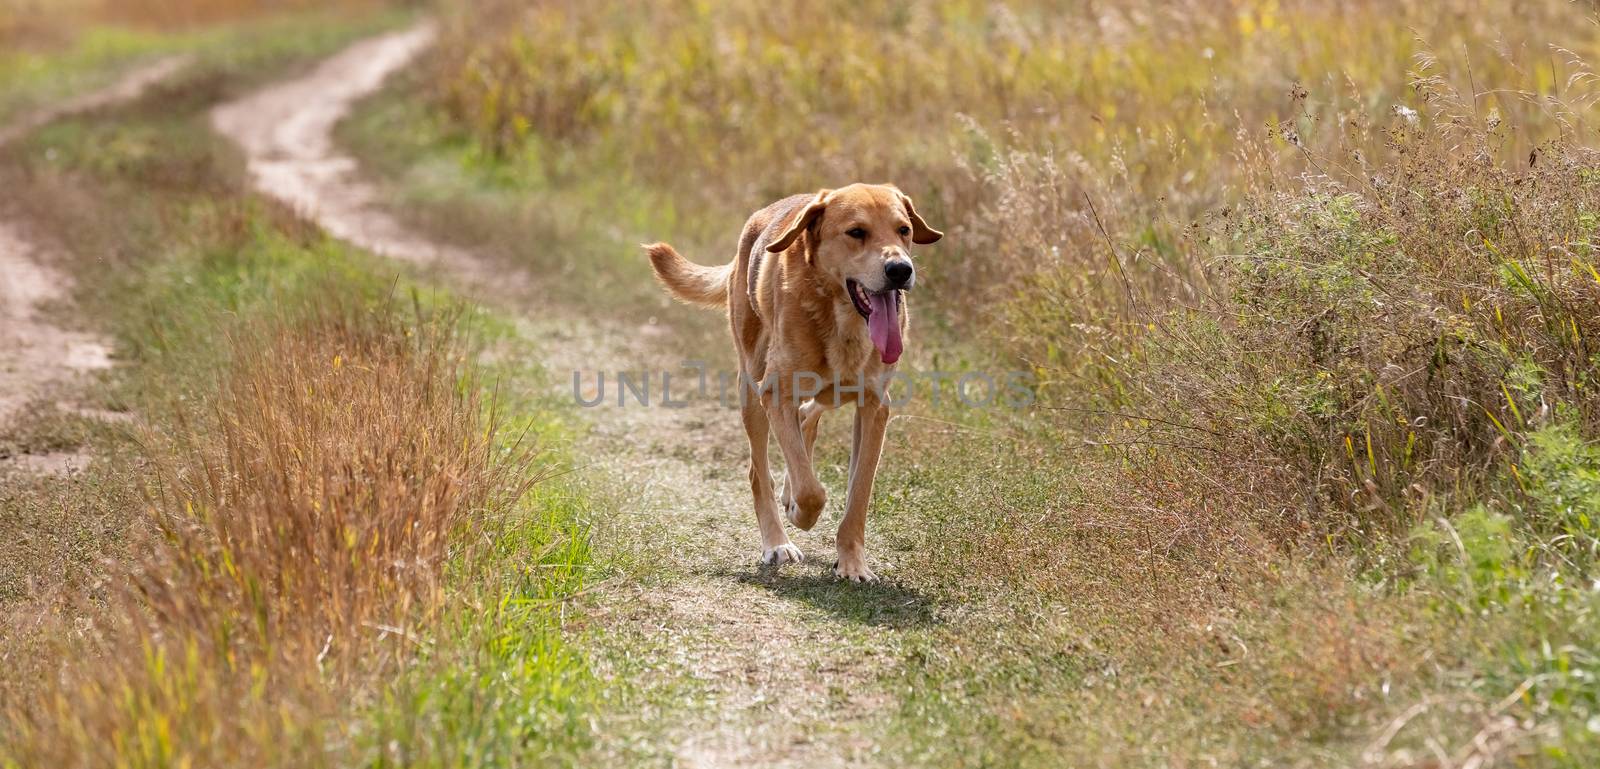 A shot of a brown hound dog running and hunting on a road in the country.